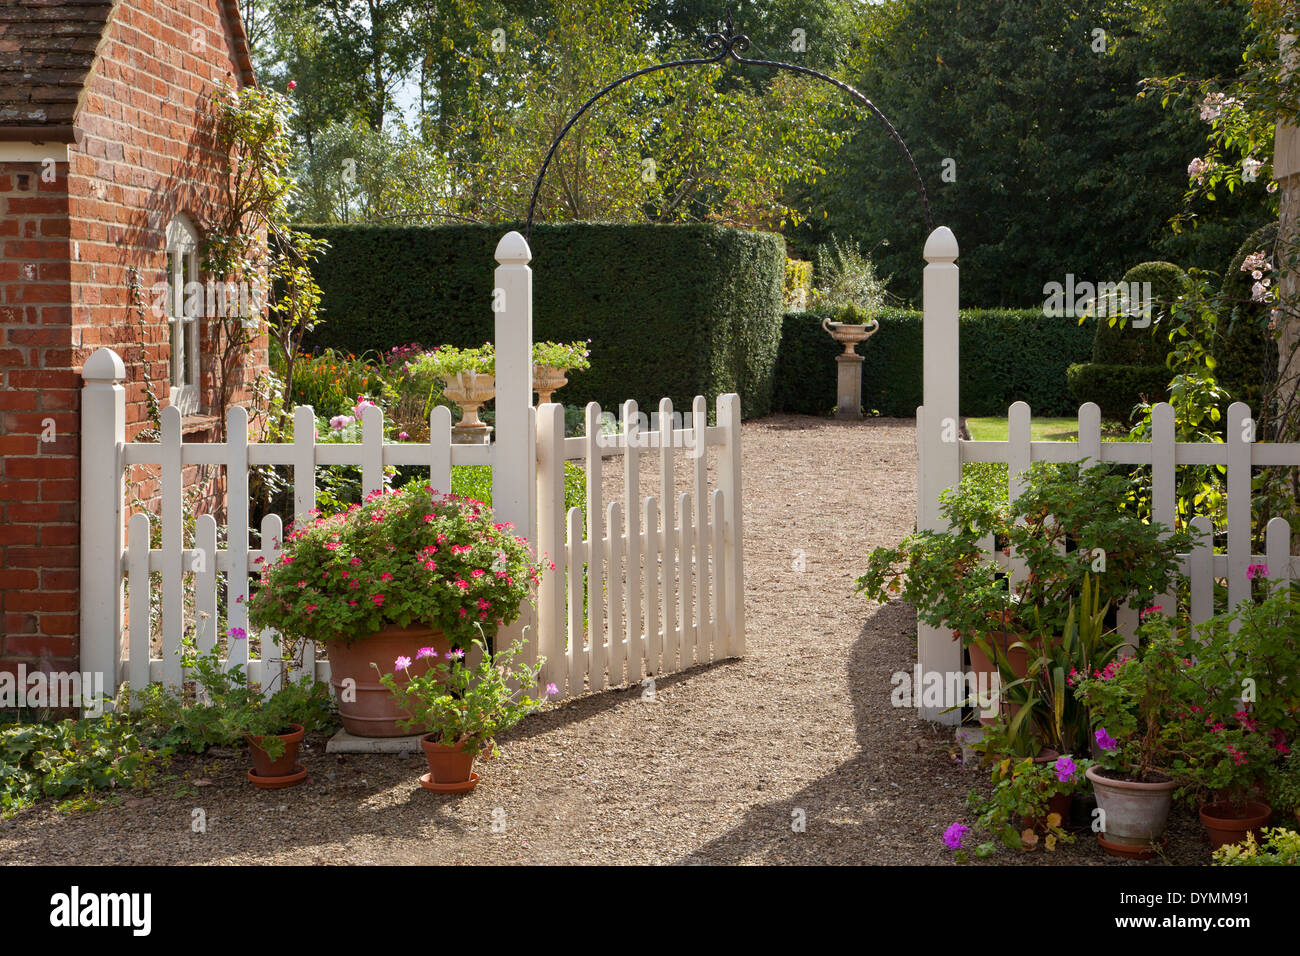 White picket fence and gated entrance to English summer garden Stock Photo